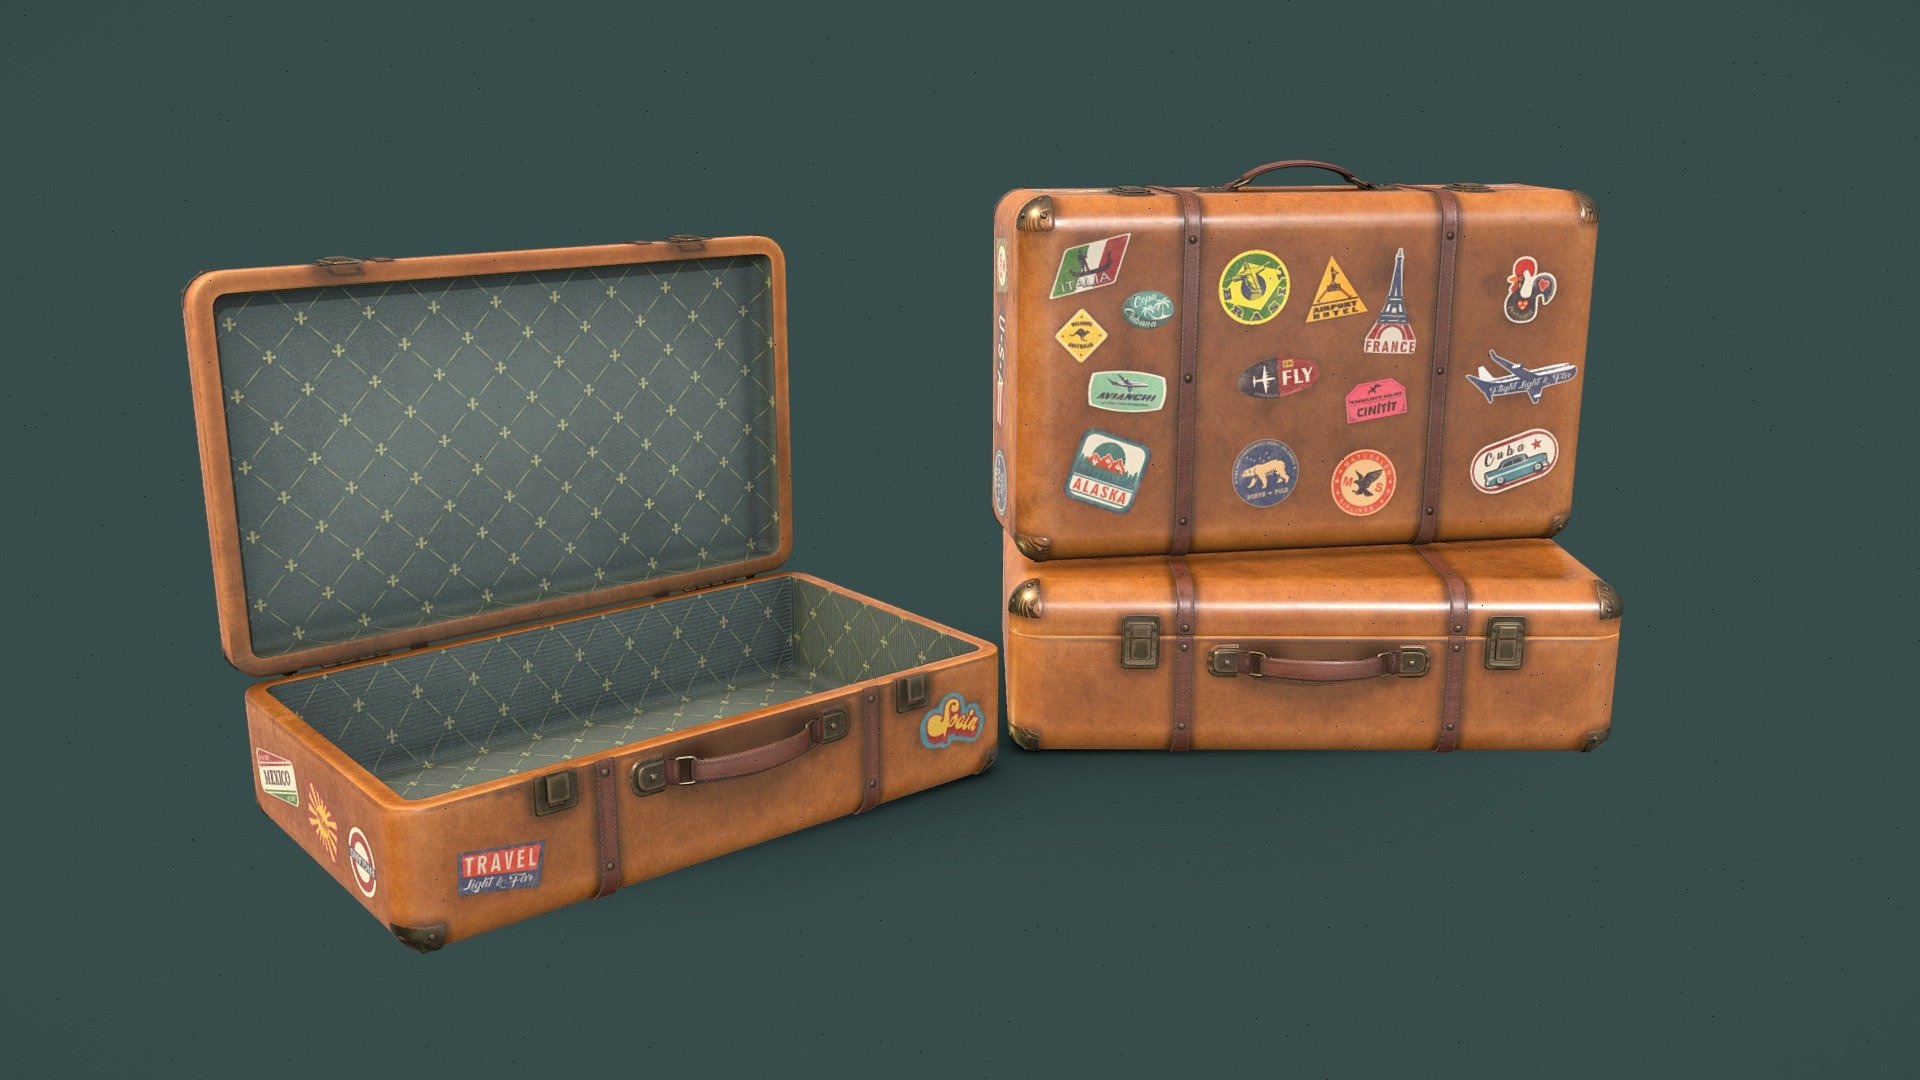 Worn out suitcases low poly versions. The suitcases are the same but there are two different groups of textures, depending on if it is desired with stickers or not. The textures are 4096x4096 and the assets are in real measures, unwrapped no overlapping all made with quads with a total of 6510 polys. The suitcases are designed inside, therefore it could be used opened or closed. Finally the stickers are designed for this asset 3d model